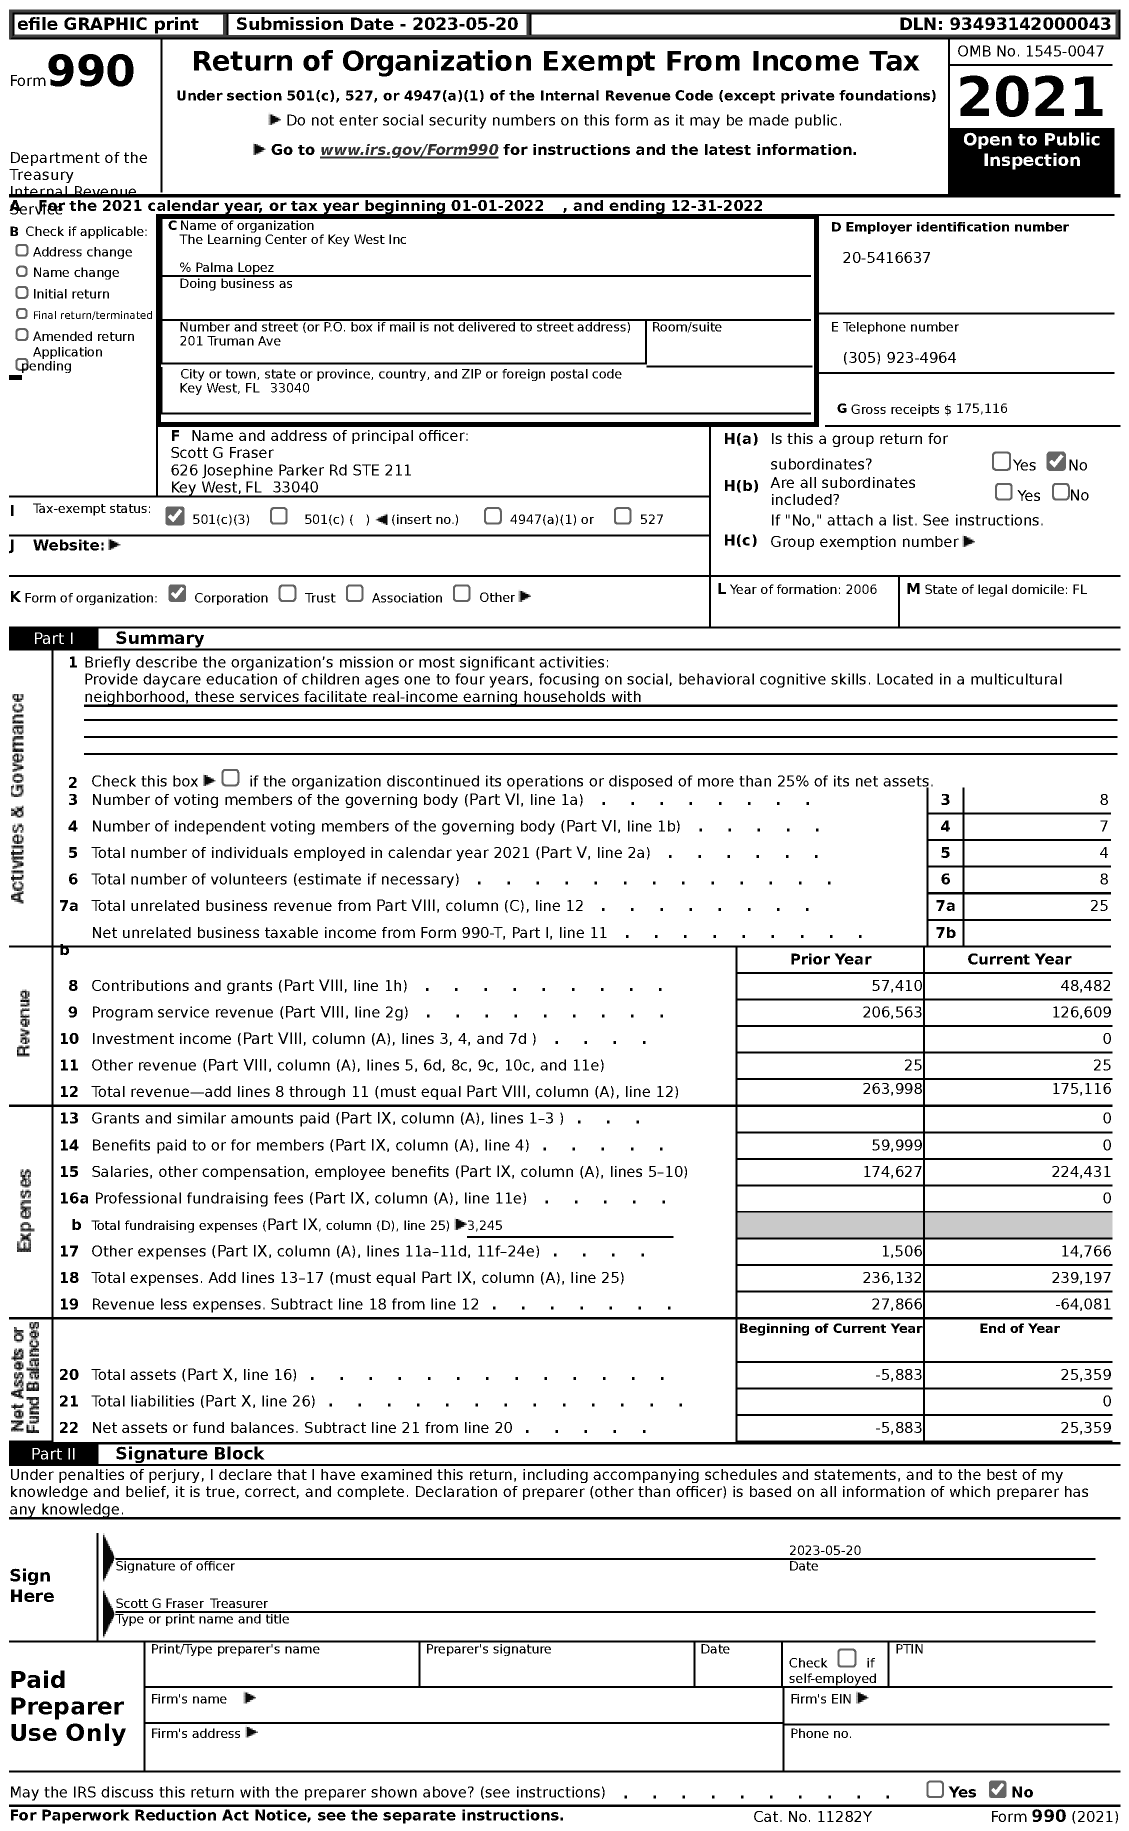 Image of first page of 2022 Form 990 for The Learning Center of Key West